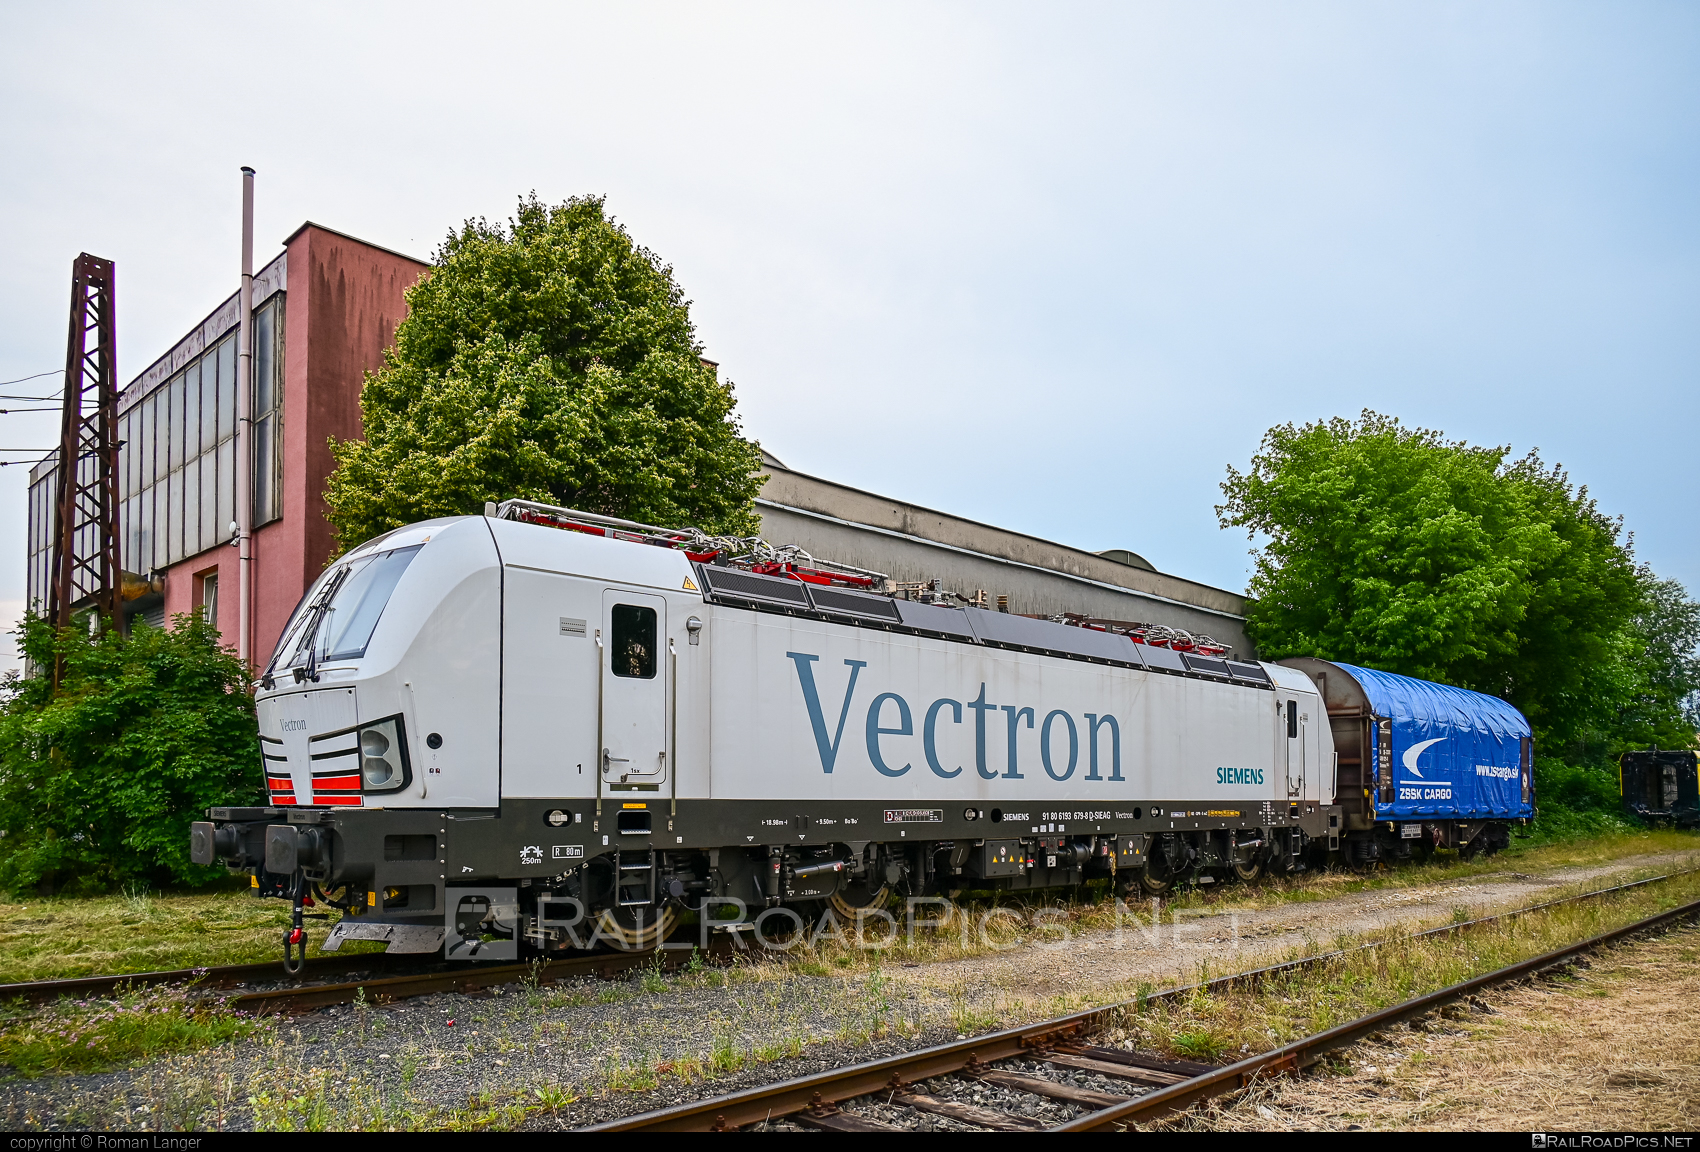 Siemens Vectron MS - 193 679-8 operated by Siemens Mobility GmbH #SiemensMobility #SiemensMobilityGmbH #siemens #siemensVectron #siemensVectronMS #vectron #vectronMS